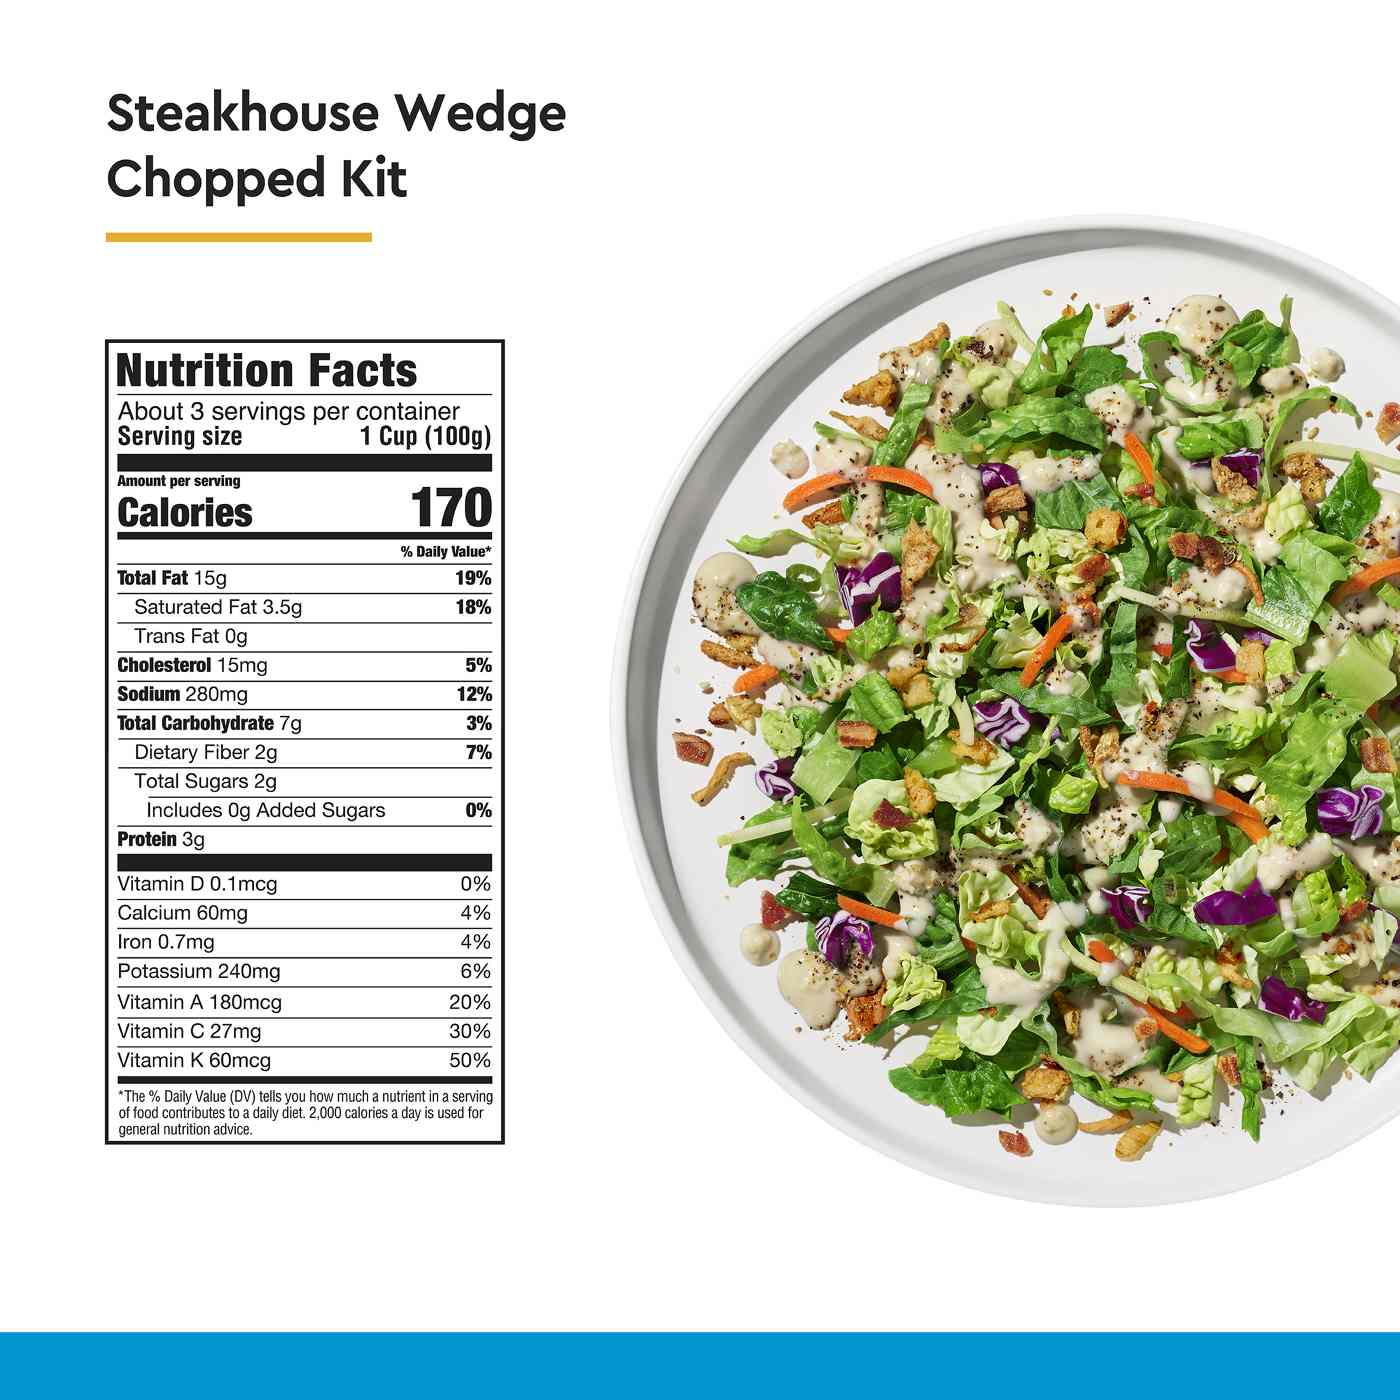 Taylor Farms Chopped Salad Kit - Steakhouse Wedge; image 6 of 6